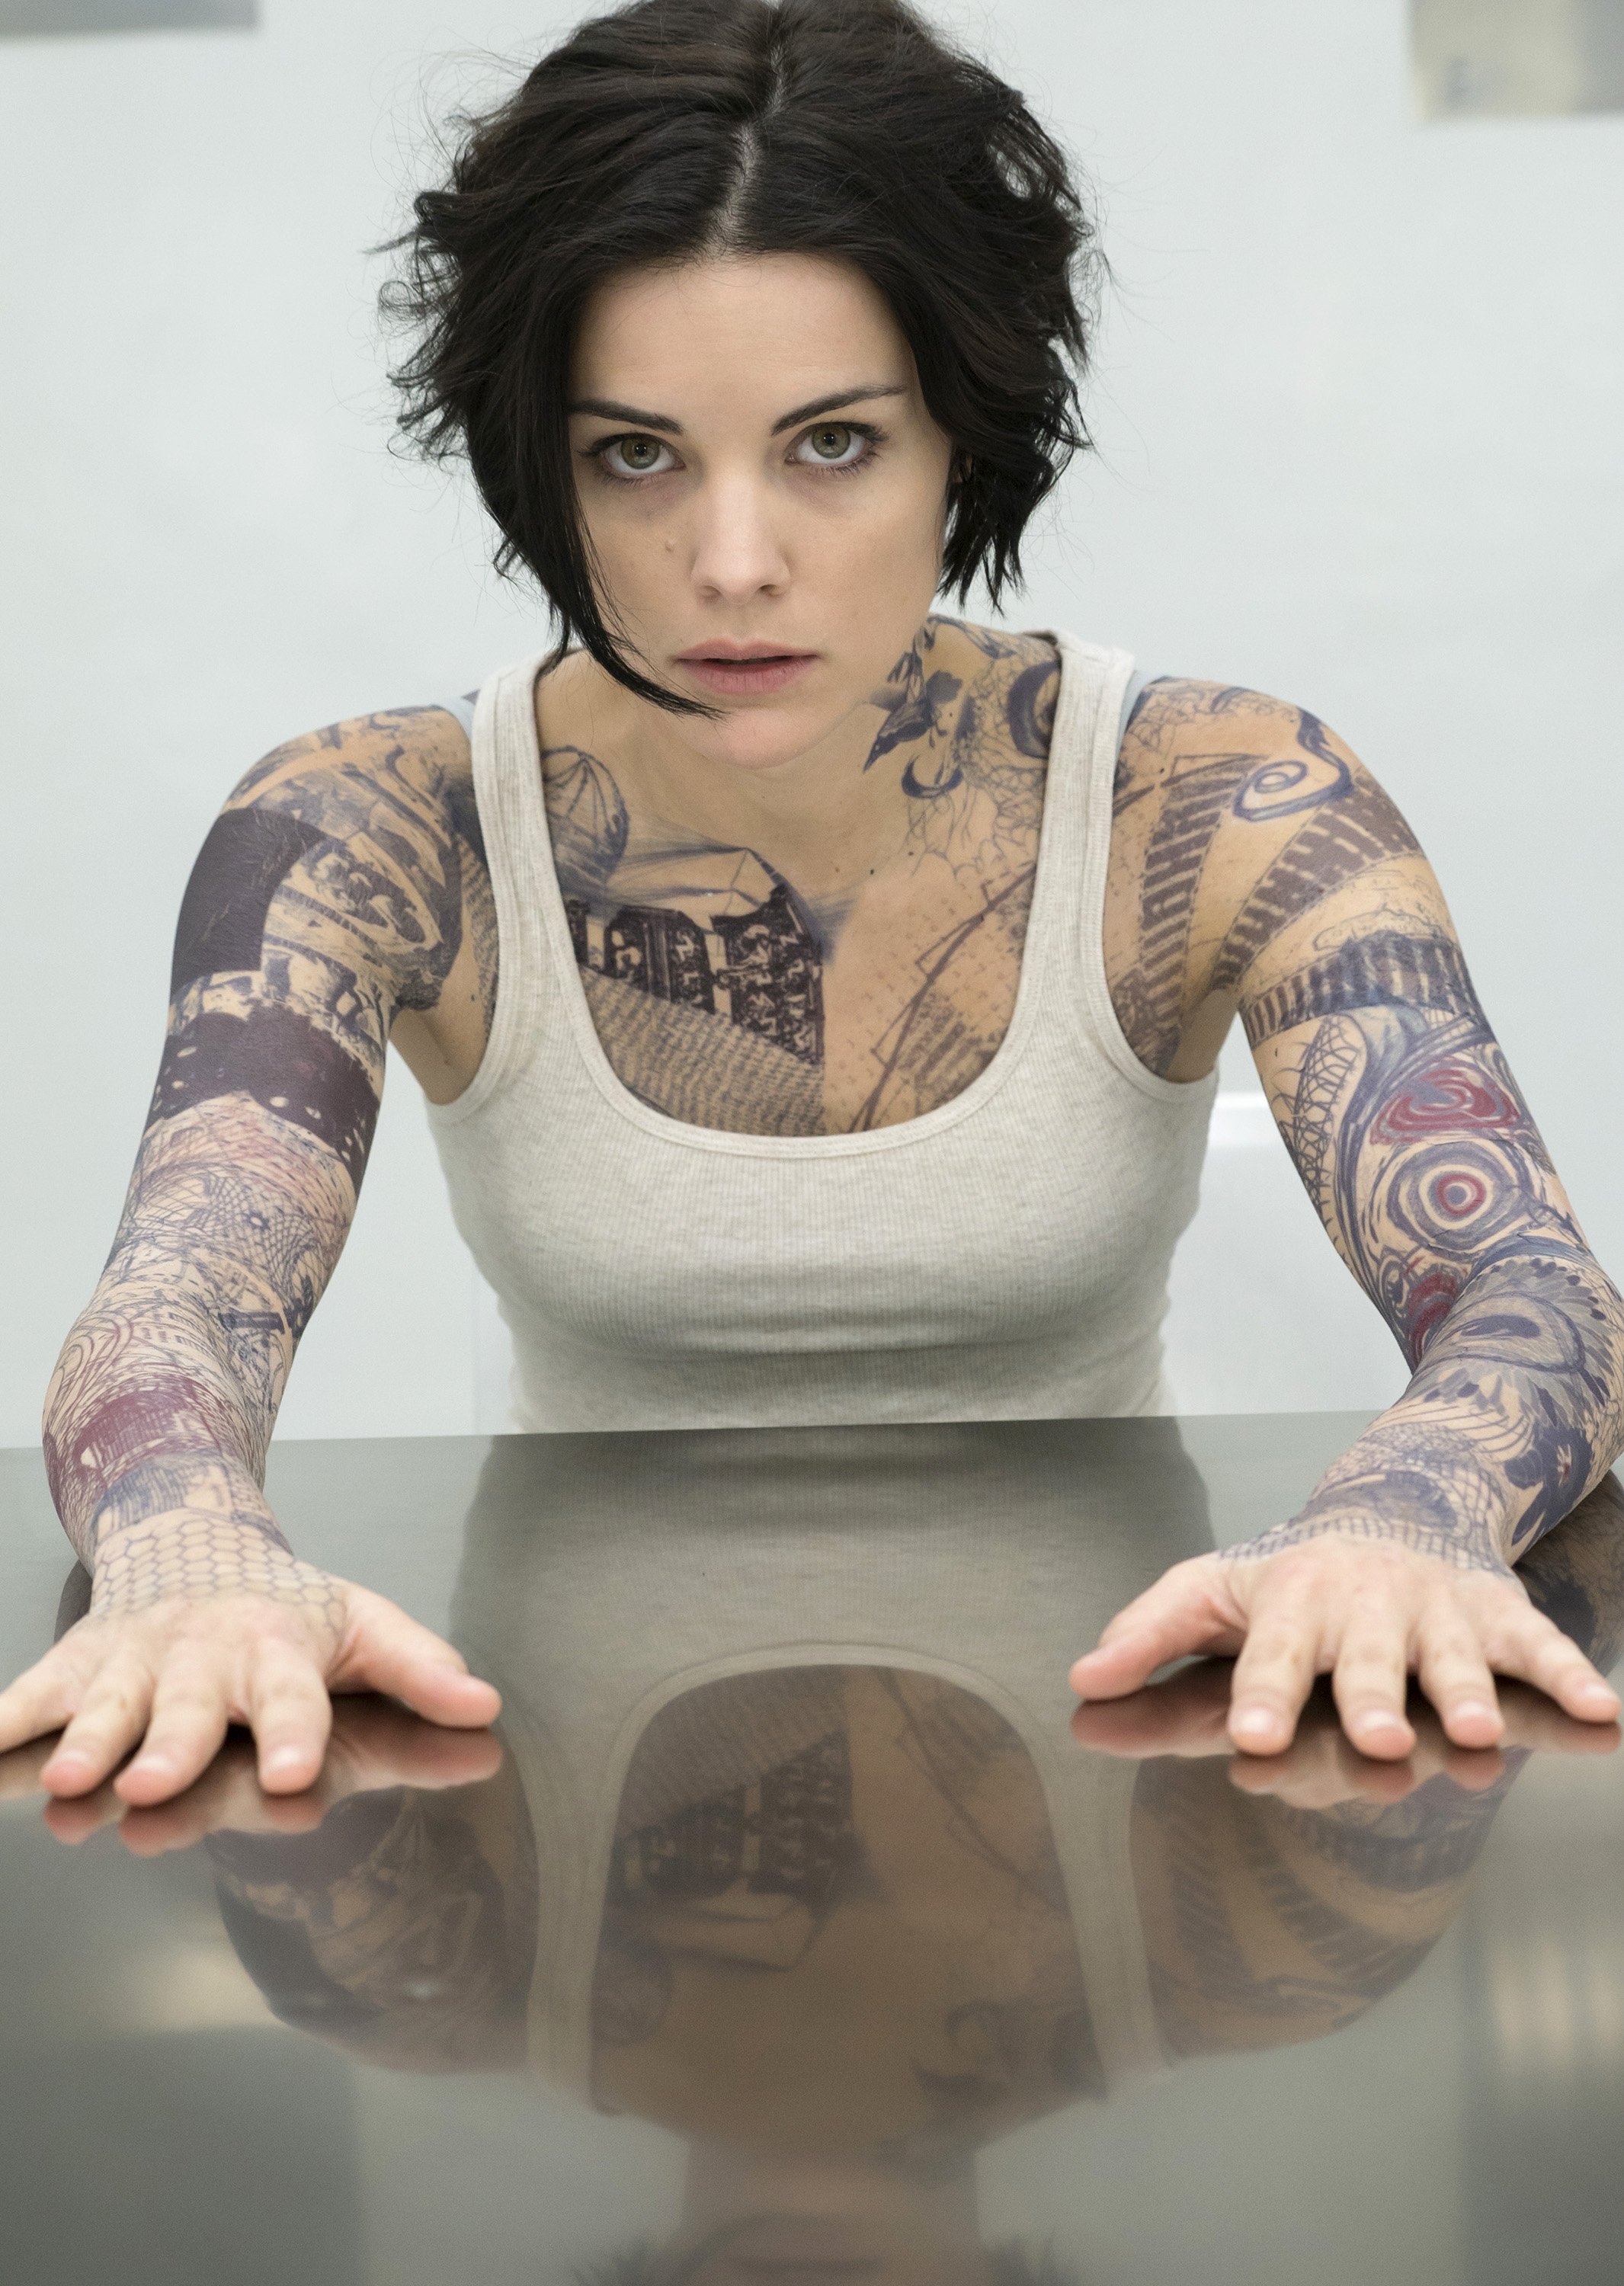 Blindspot: Tattoos lead viewer on fast and furious ride - NZ Herald